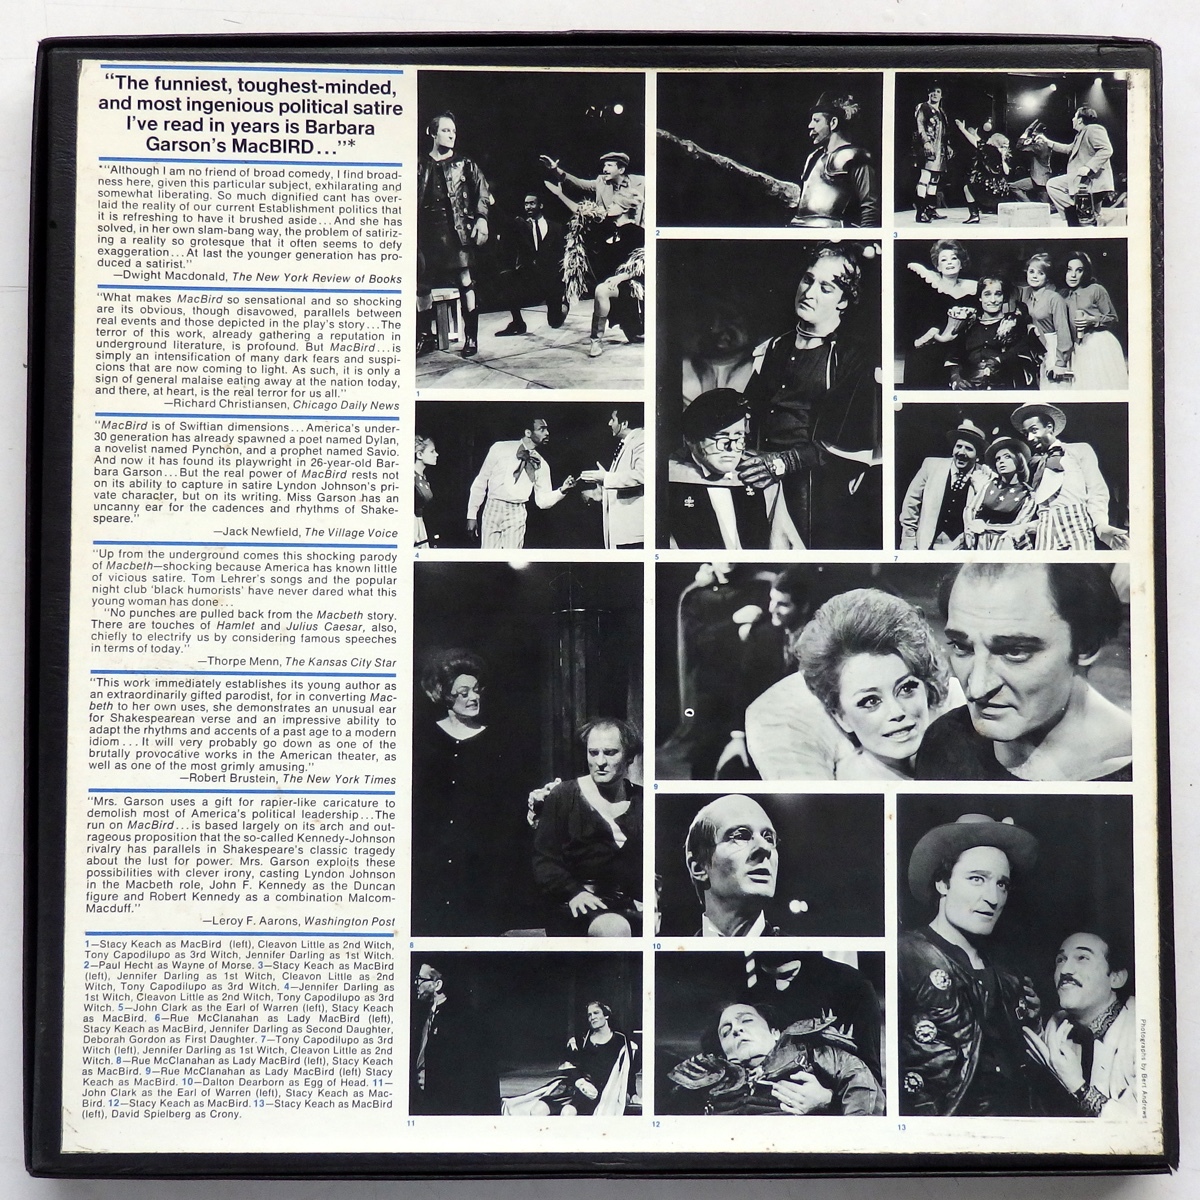 LP MAC BIRD! BARBARA GARSON A RECORDING OF THE COMPLETE TEXT OF THE PLAY WITH THE ORIGINAL CAST EVR-004 米盤 2枚組 BOX_画像2